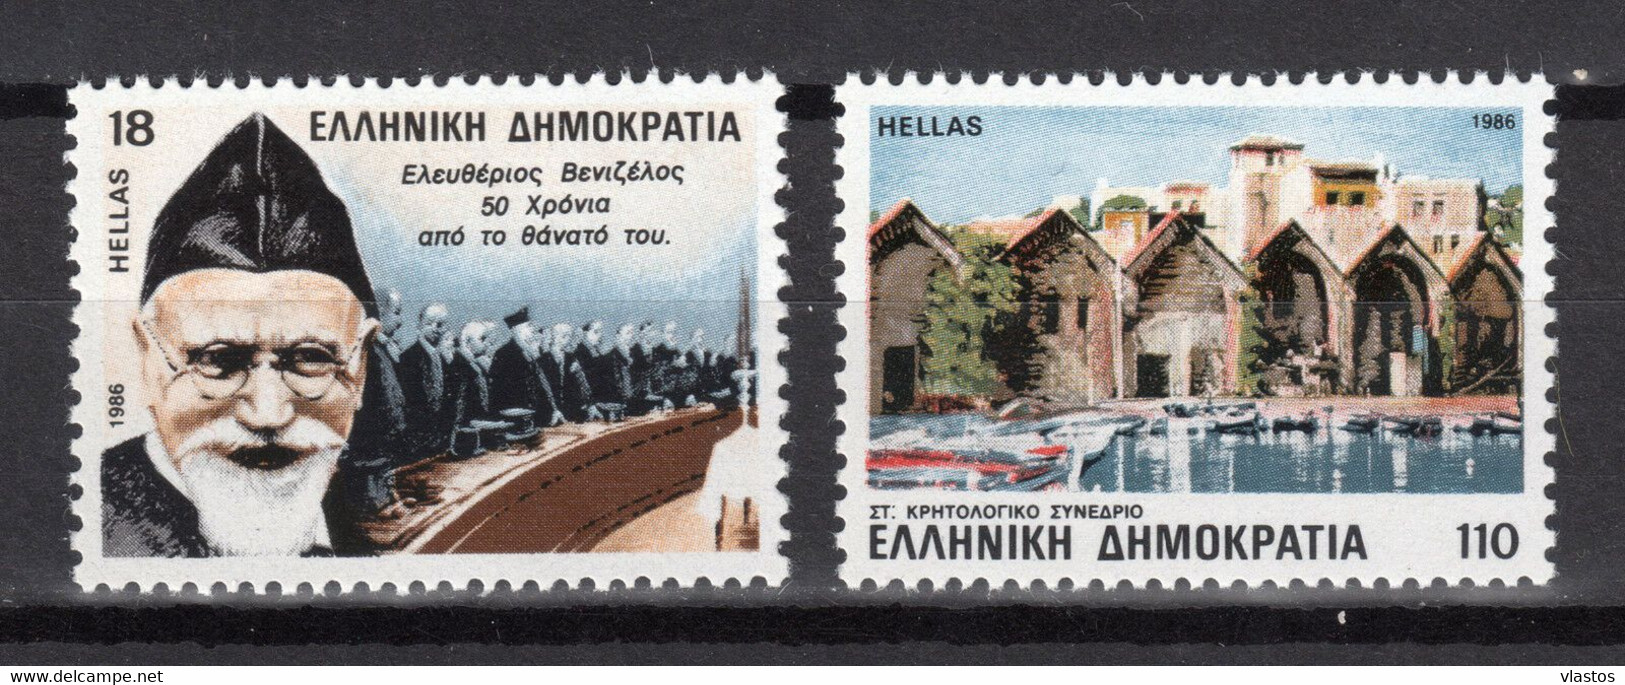 GREECE 1986 COMPLETE YEAR - PERFORATED STAMPS MNH